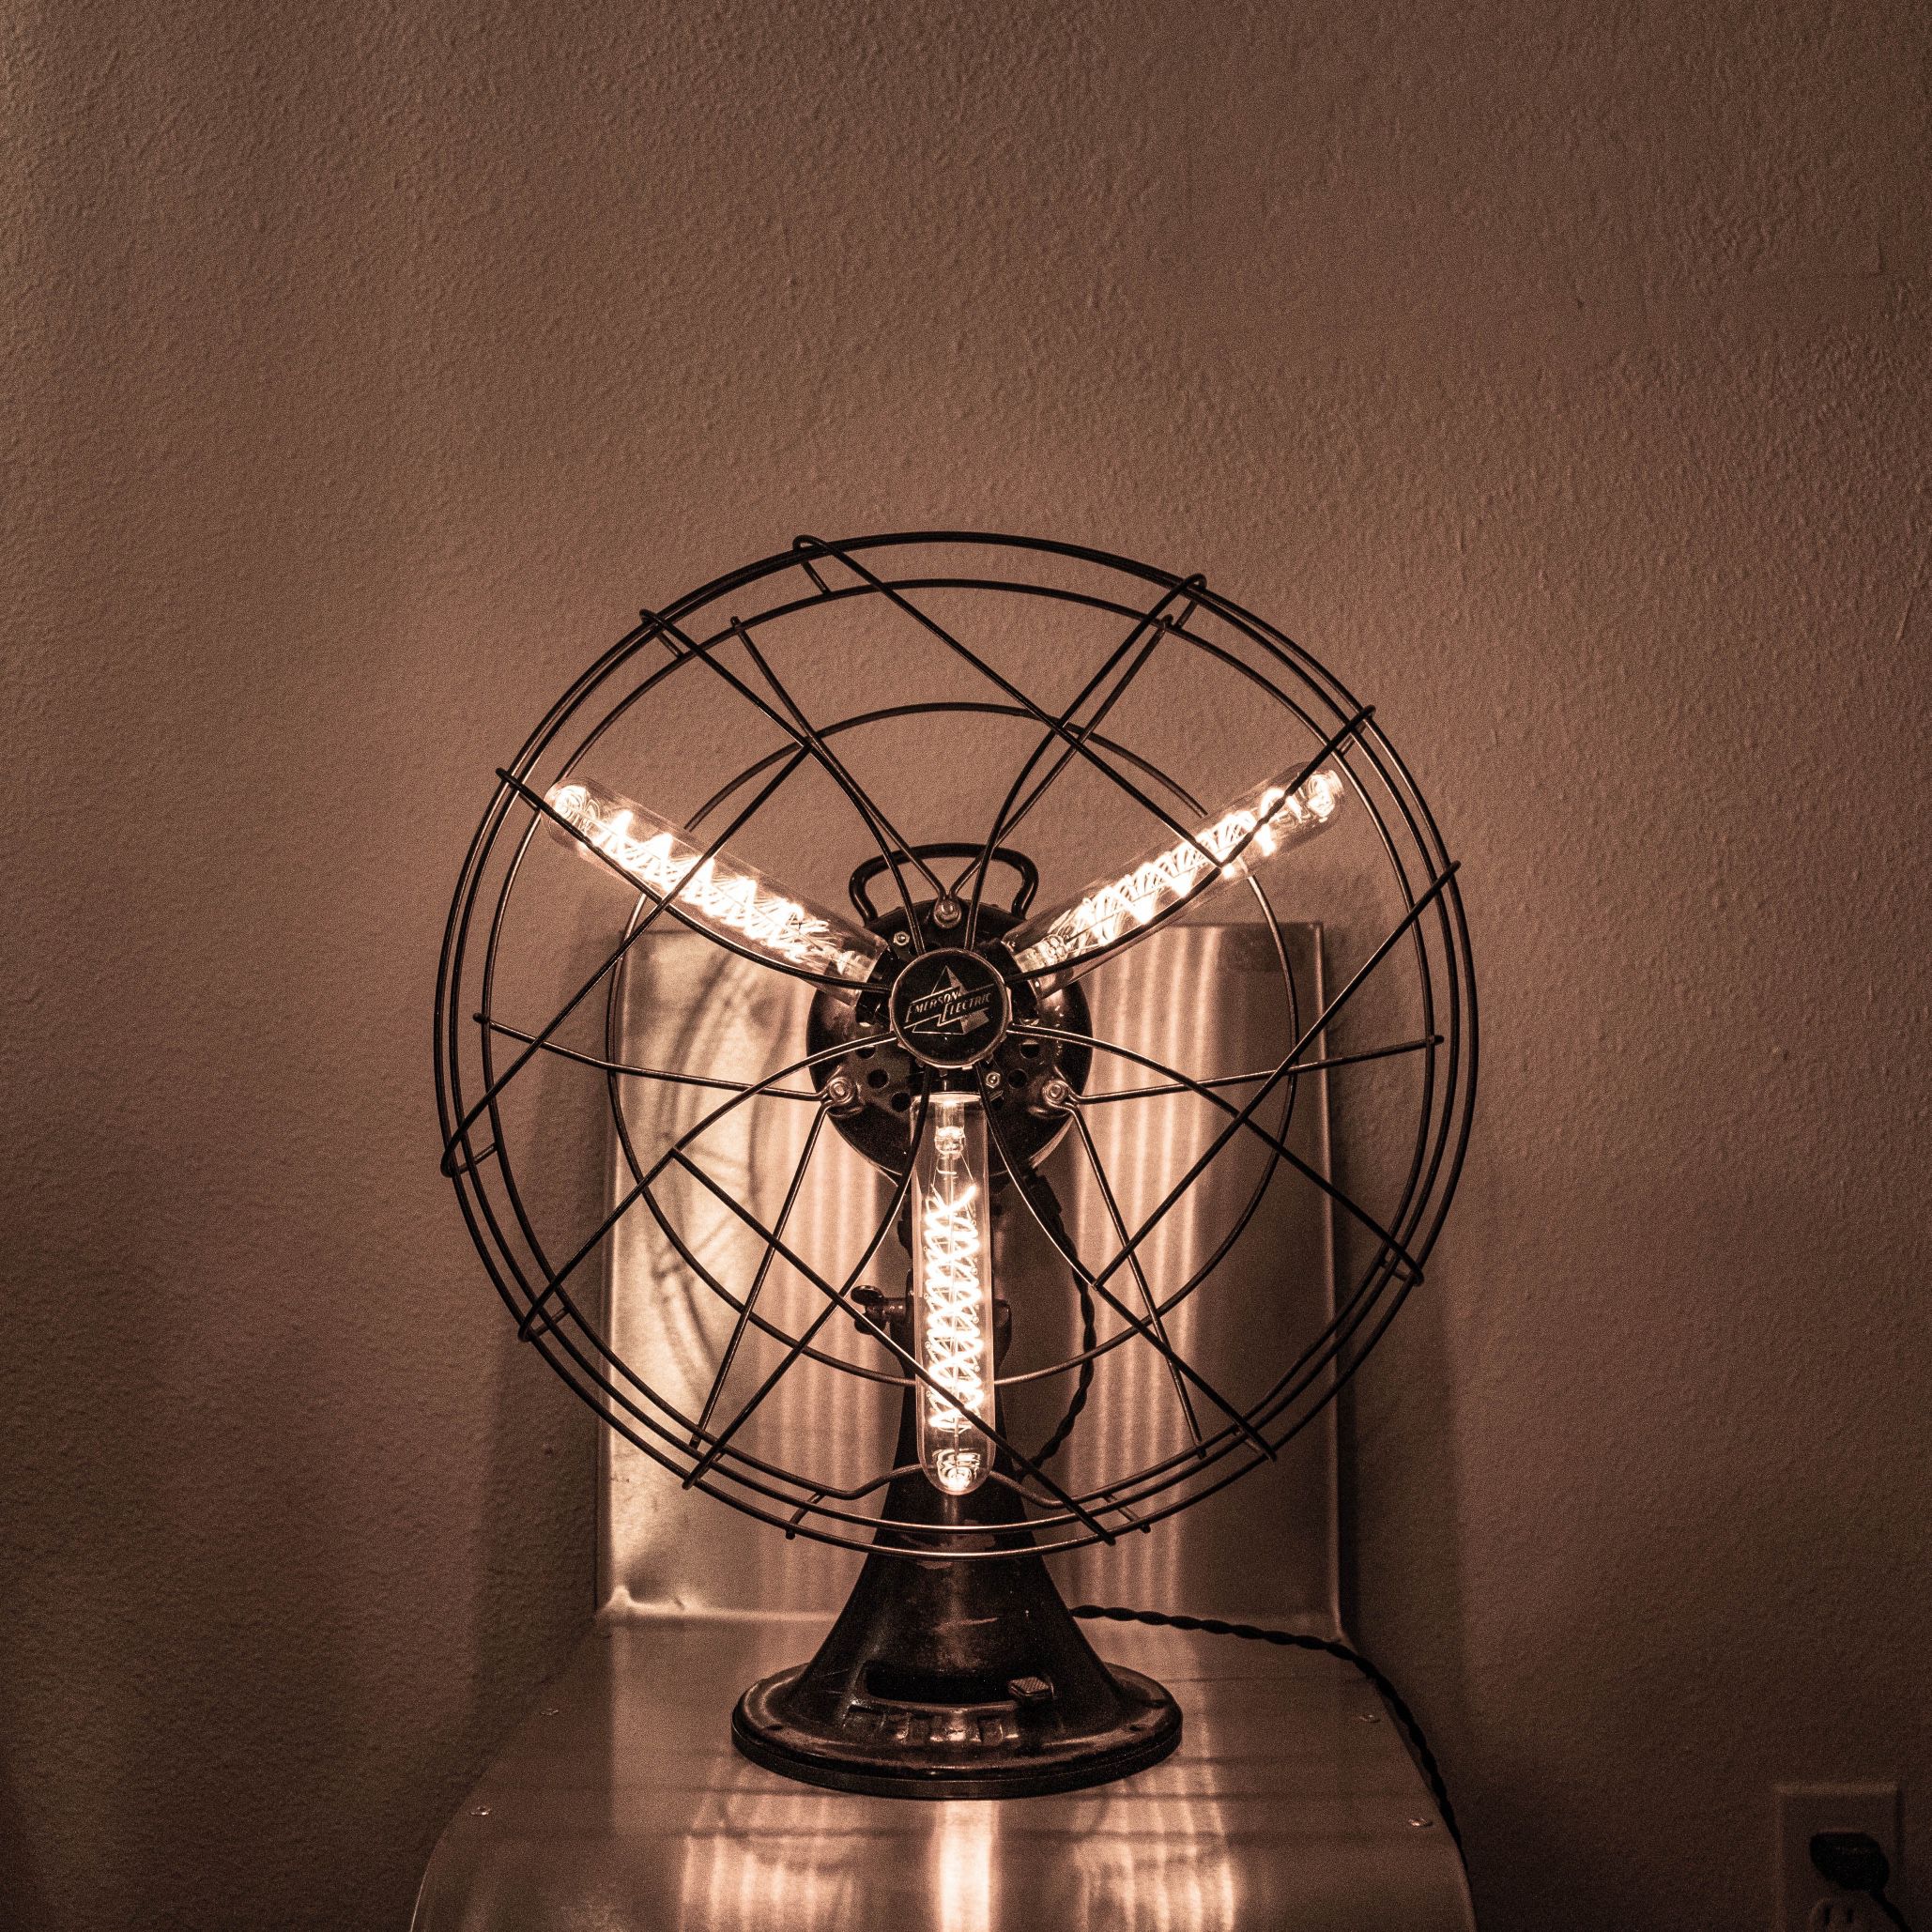 Lamp Beautiful Vintage Fan Professionally Converted Into Edison Steampunk Lamp